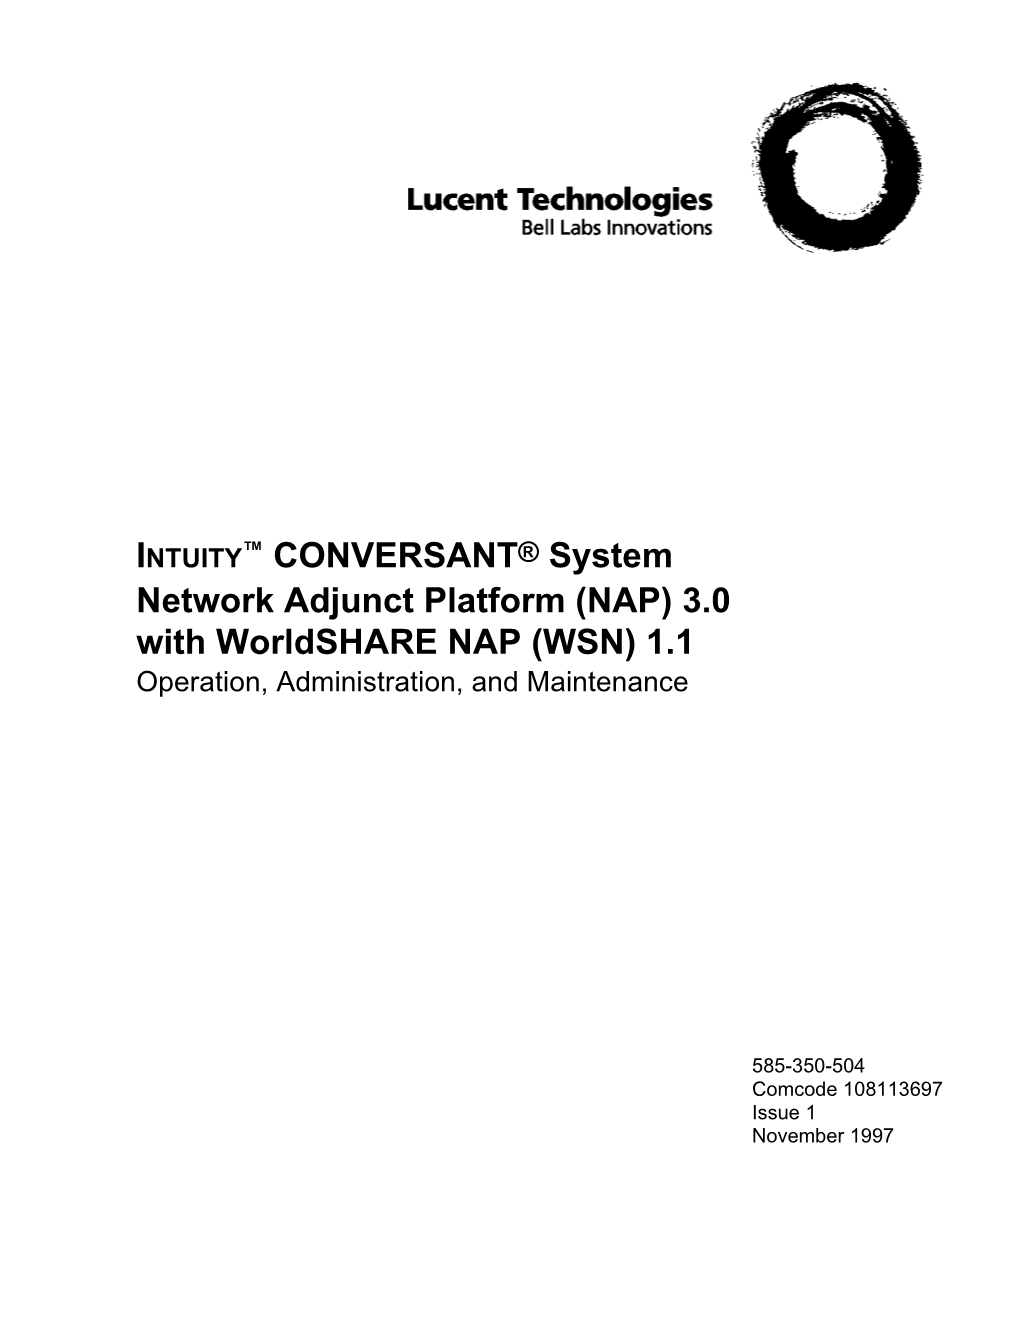 ™ CONVERSANT® System Network Adjunct Platform (NAP) 3.0 with Worldshare NAP (WSN) 1.1 Operation, Administration, and Maintenance